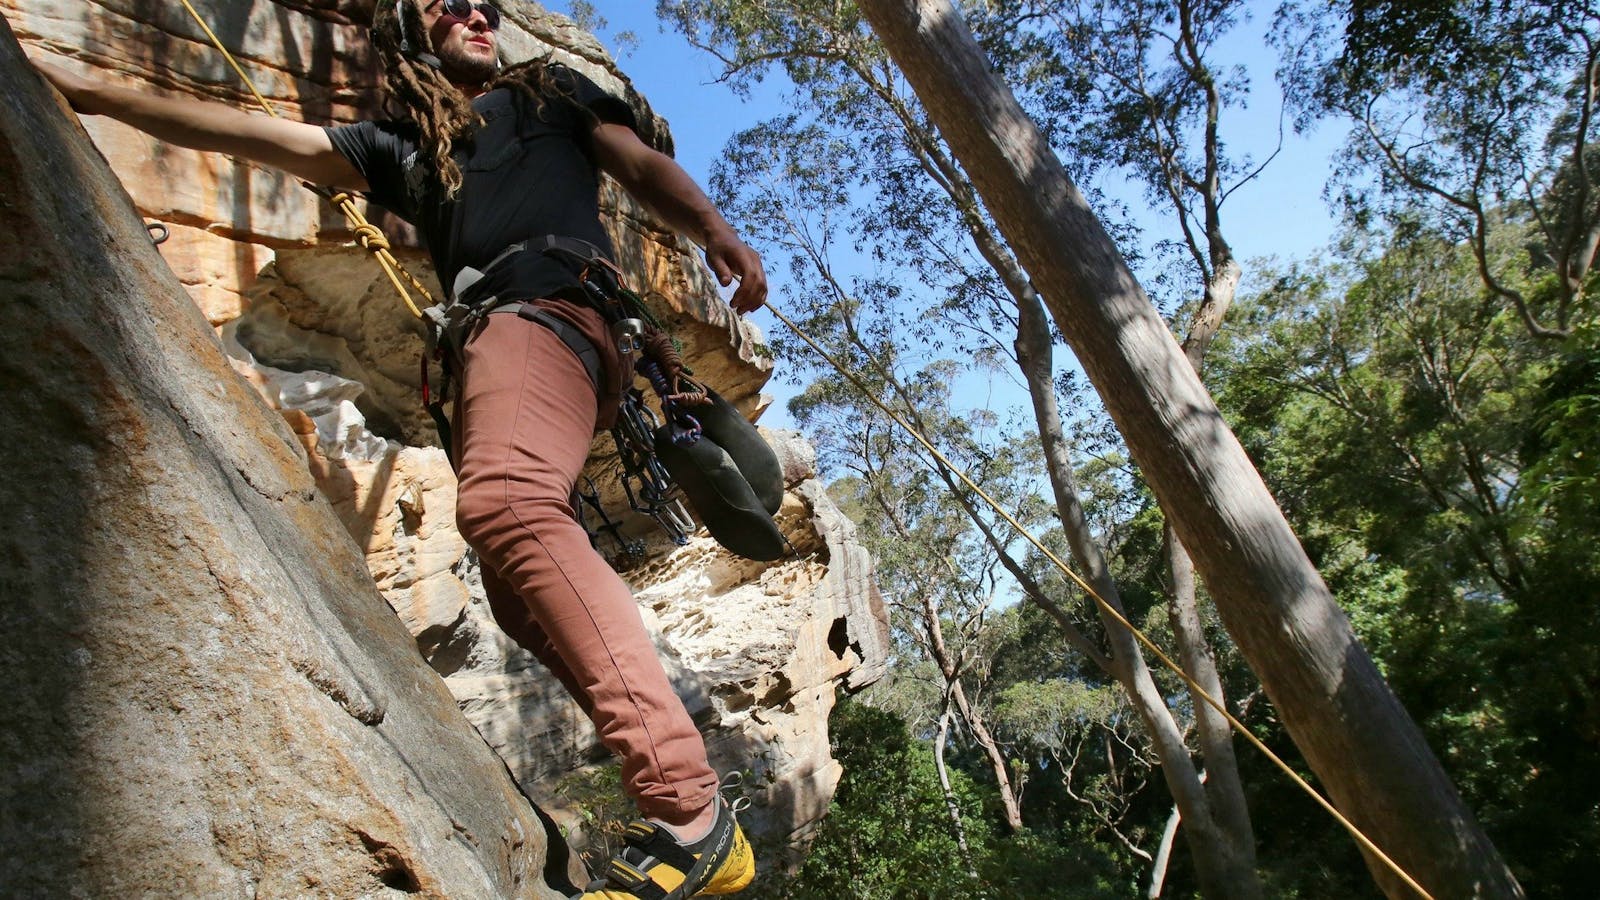 World class climbing on the Shoalhaven River is easy with a guide, like Kyle from Outdoor Raw.